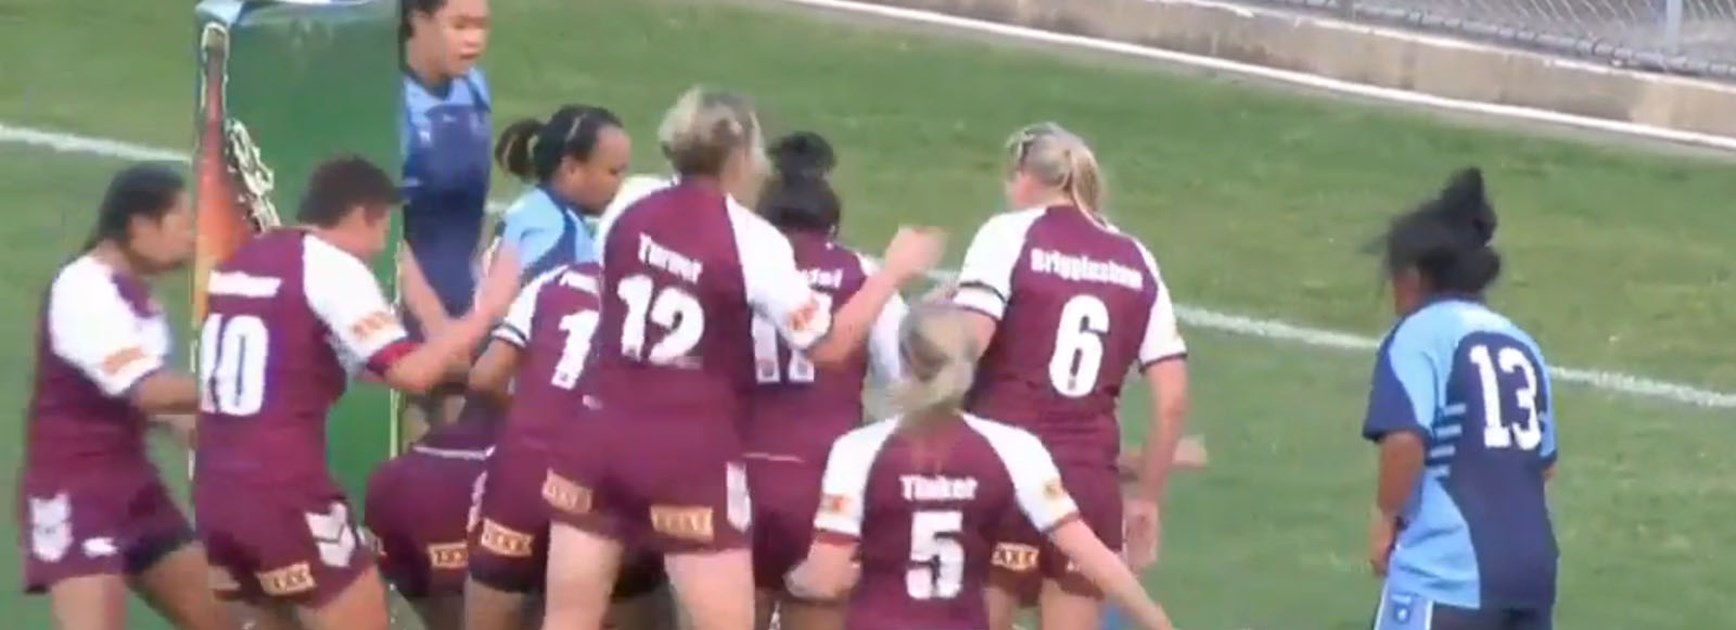 Queensland score against NSW on their way to a 16th consecutive victory in 2014.